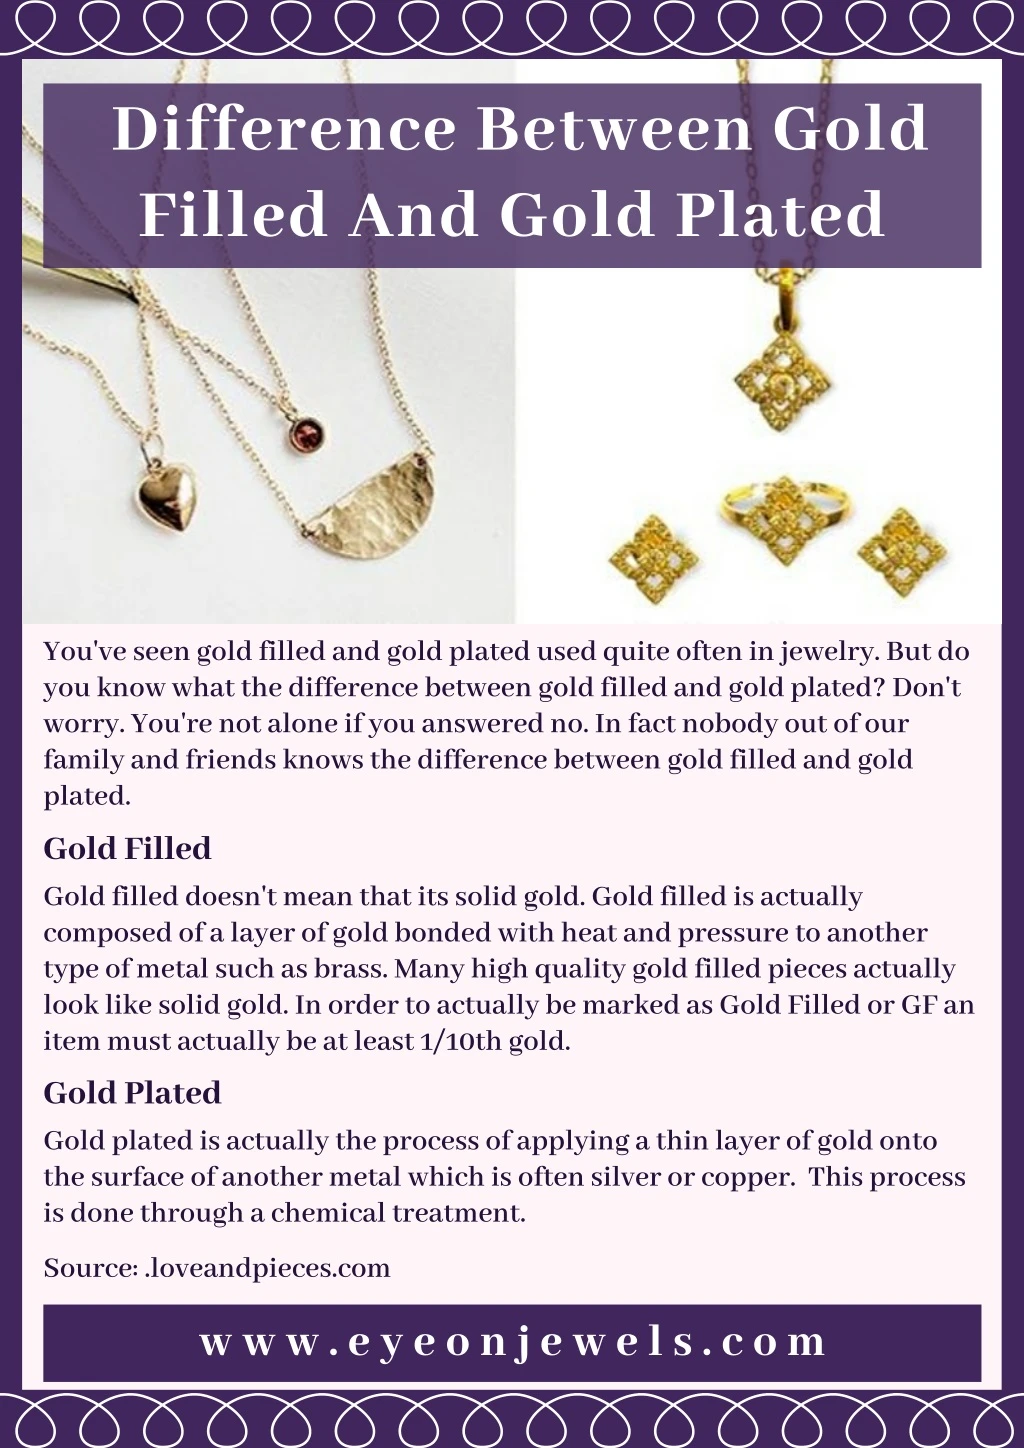 difference between gold filled and gold plated